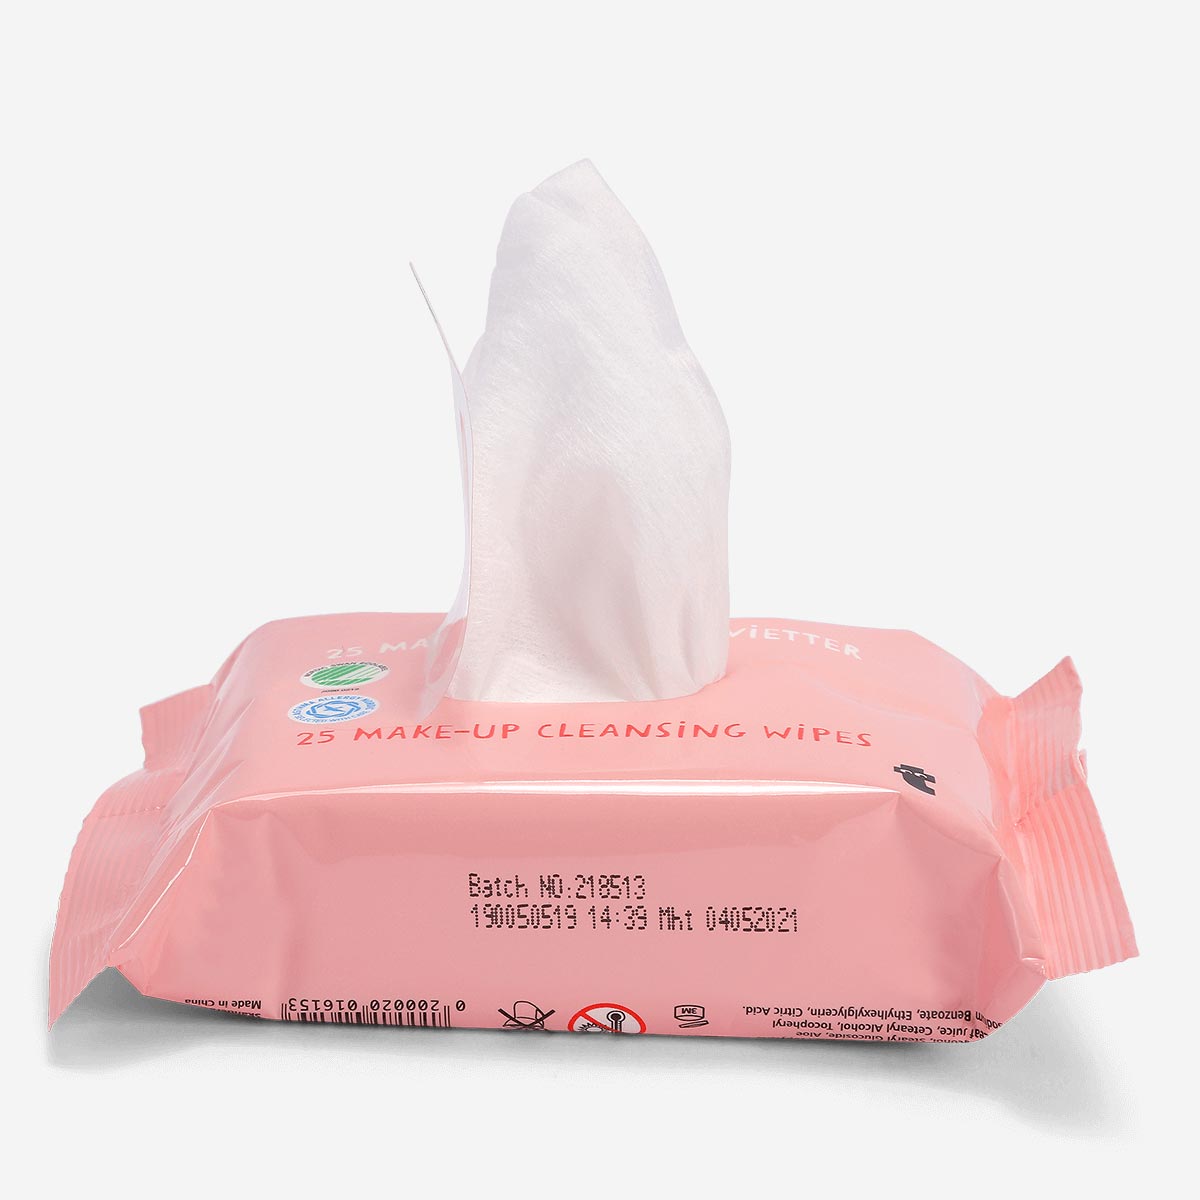 Make-up cleansing wipes Personal care Flying Tiger Copenhagen 